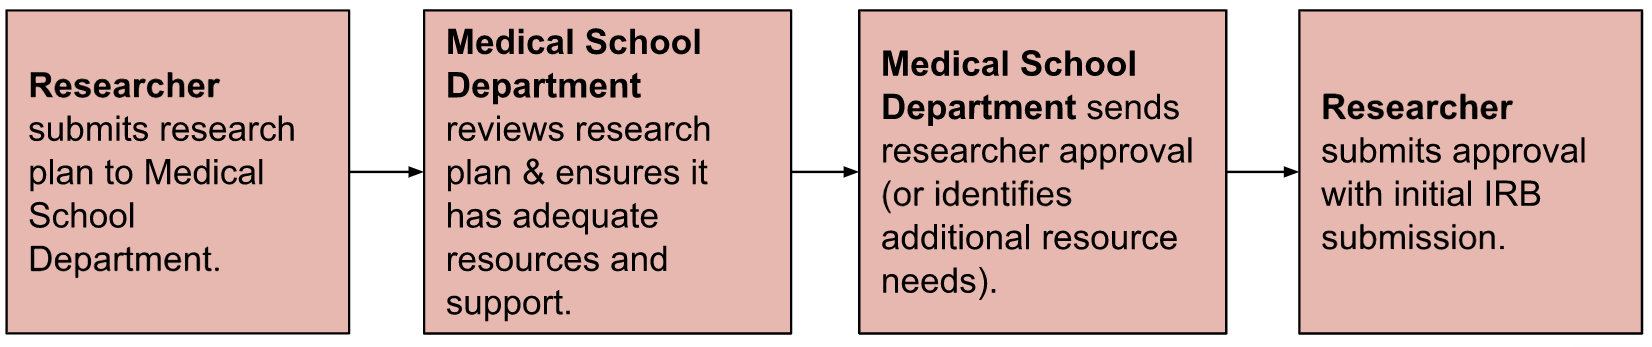 Clincial research review process image 